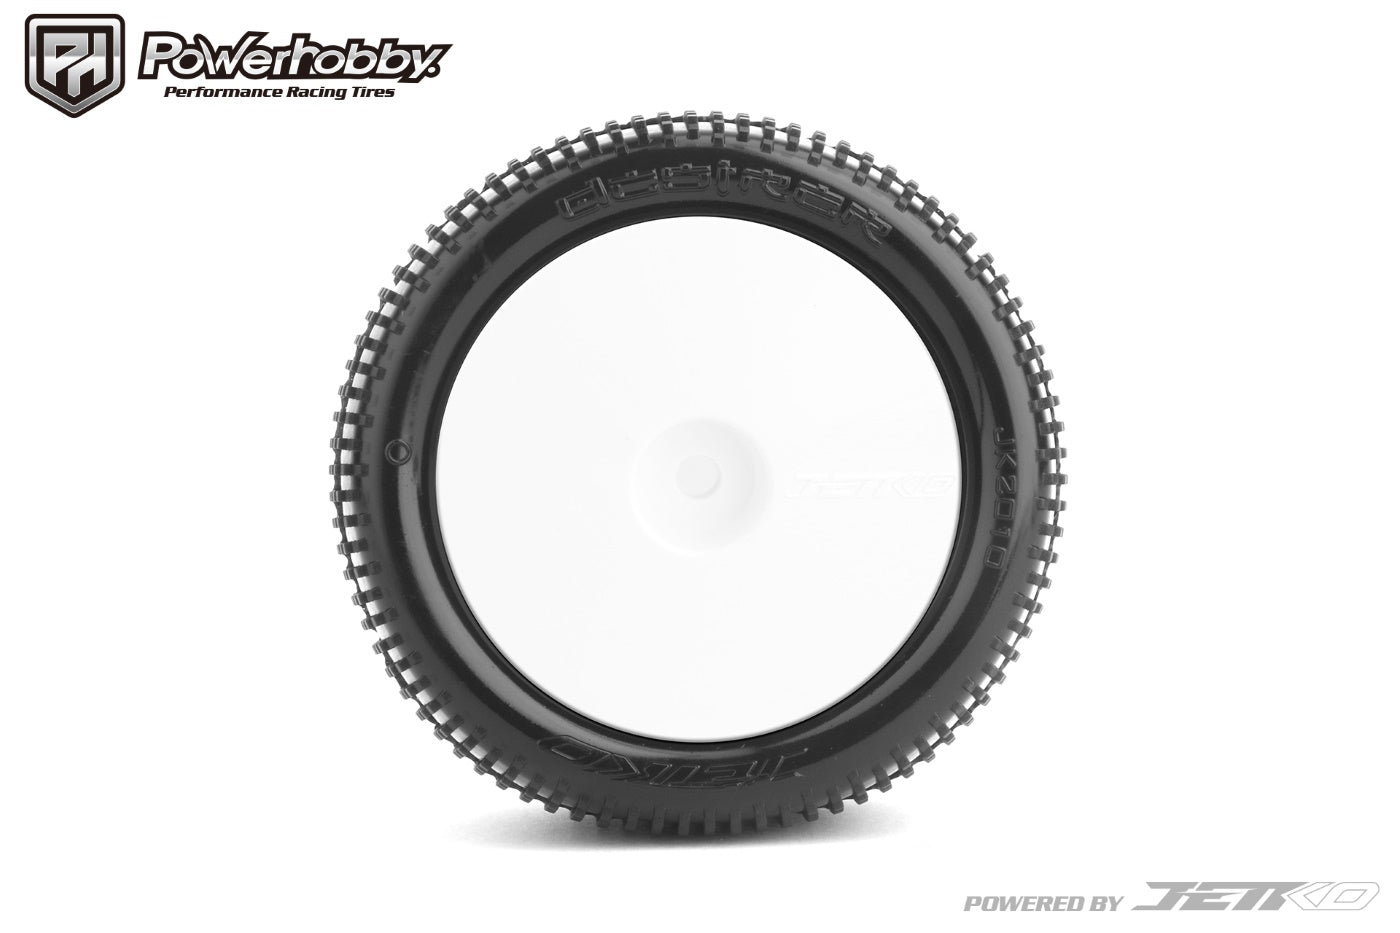 Powerhobby Desirer 1/10 Rear Buggy Clay Mounted Tires Ultra Soft 2WD / 4WD.